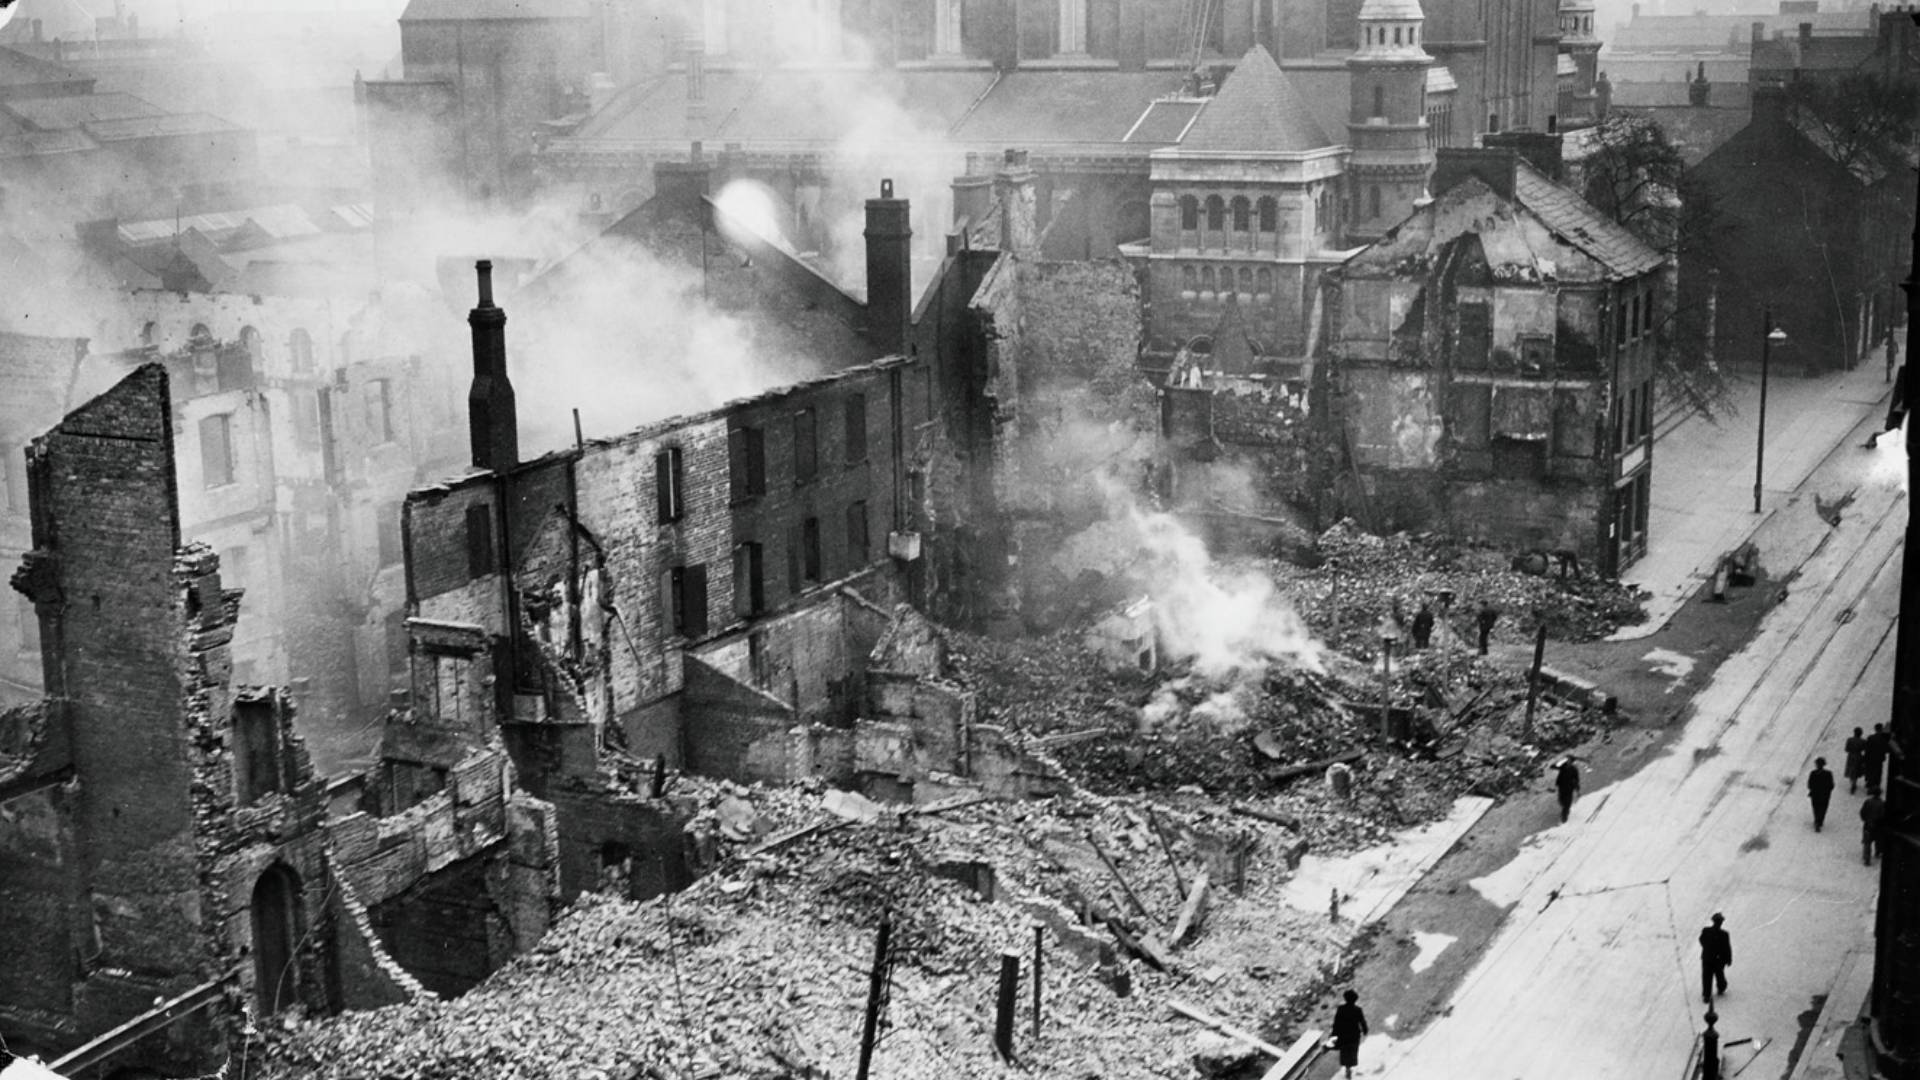 Clearance work underway following the destruction caused during the Belfast Blitz to the corner of York Street and Donegall Street. Belfast Cathedral remains standing in the background.